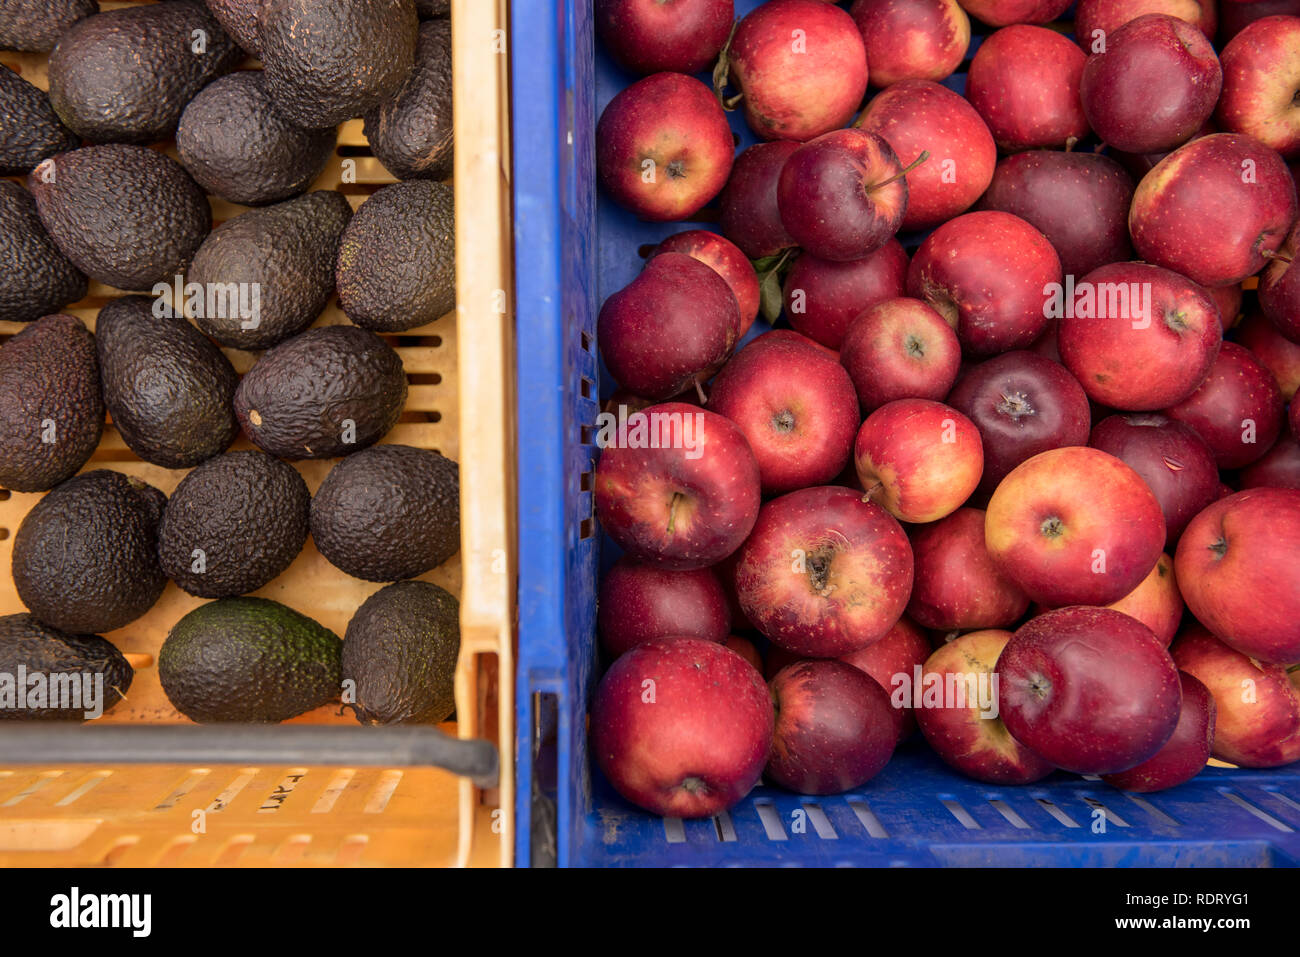 Bright plastic baskets filled with avocados and apples at the Old Packhouse Market in Kerikeri, New Zealand. Stock Photo